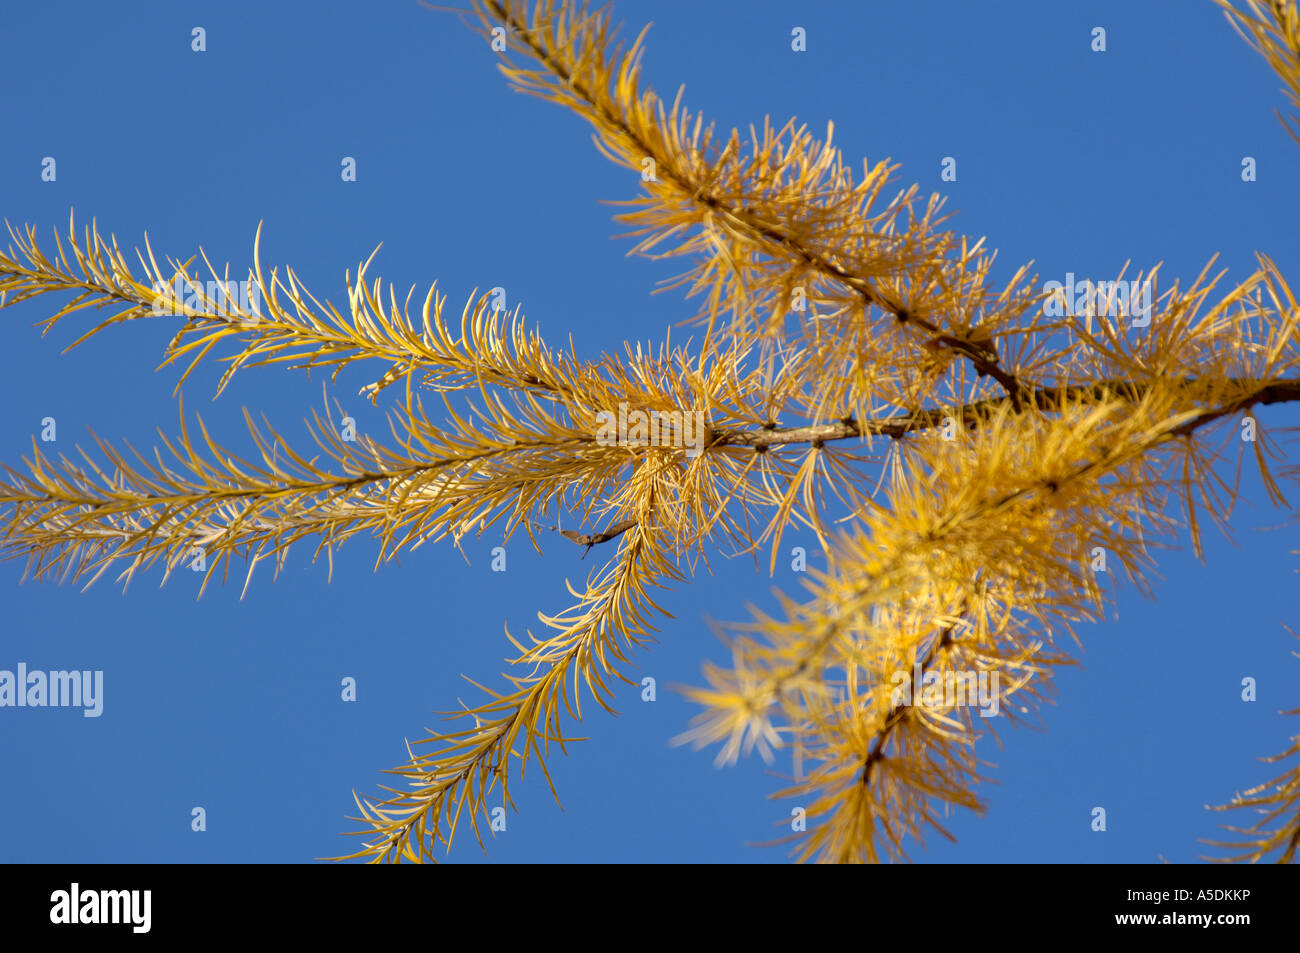 Larch species Larix sp needles in autumn showing gold colour Stock Photo